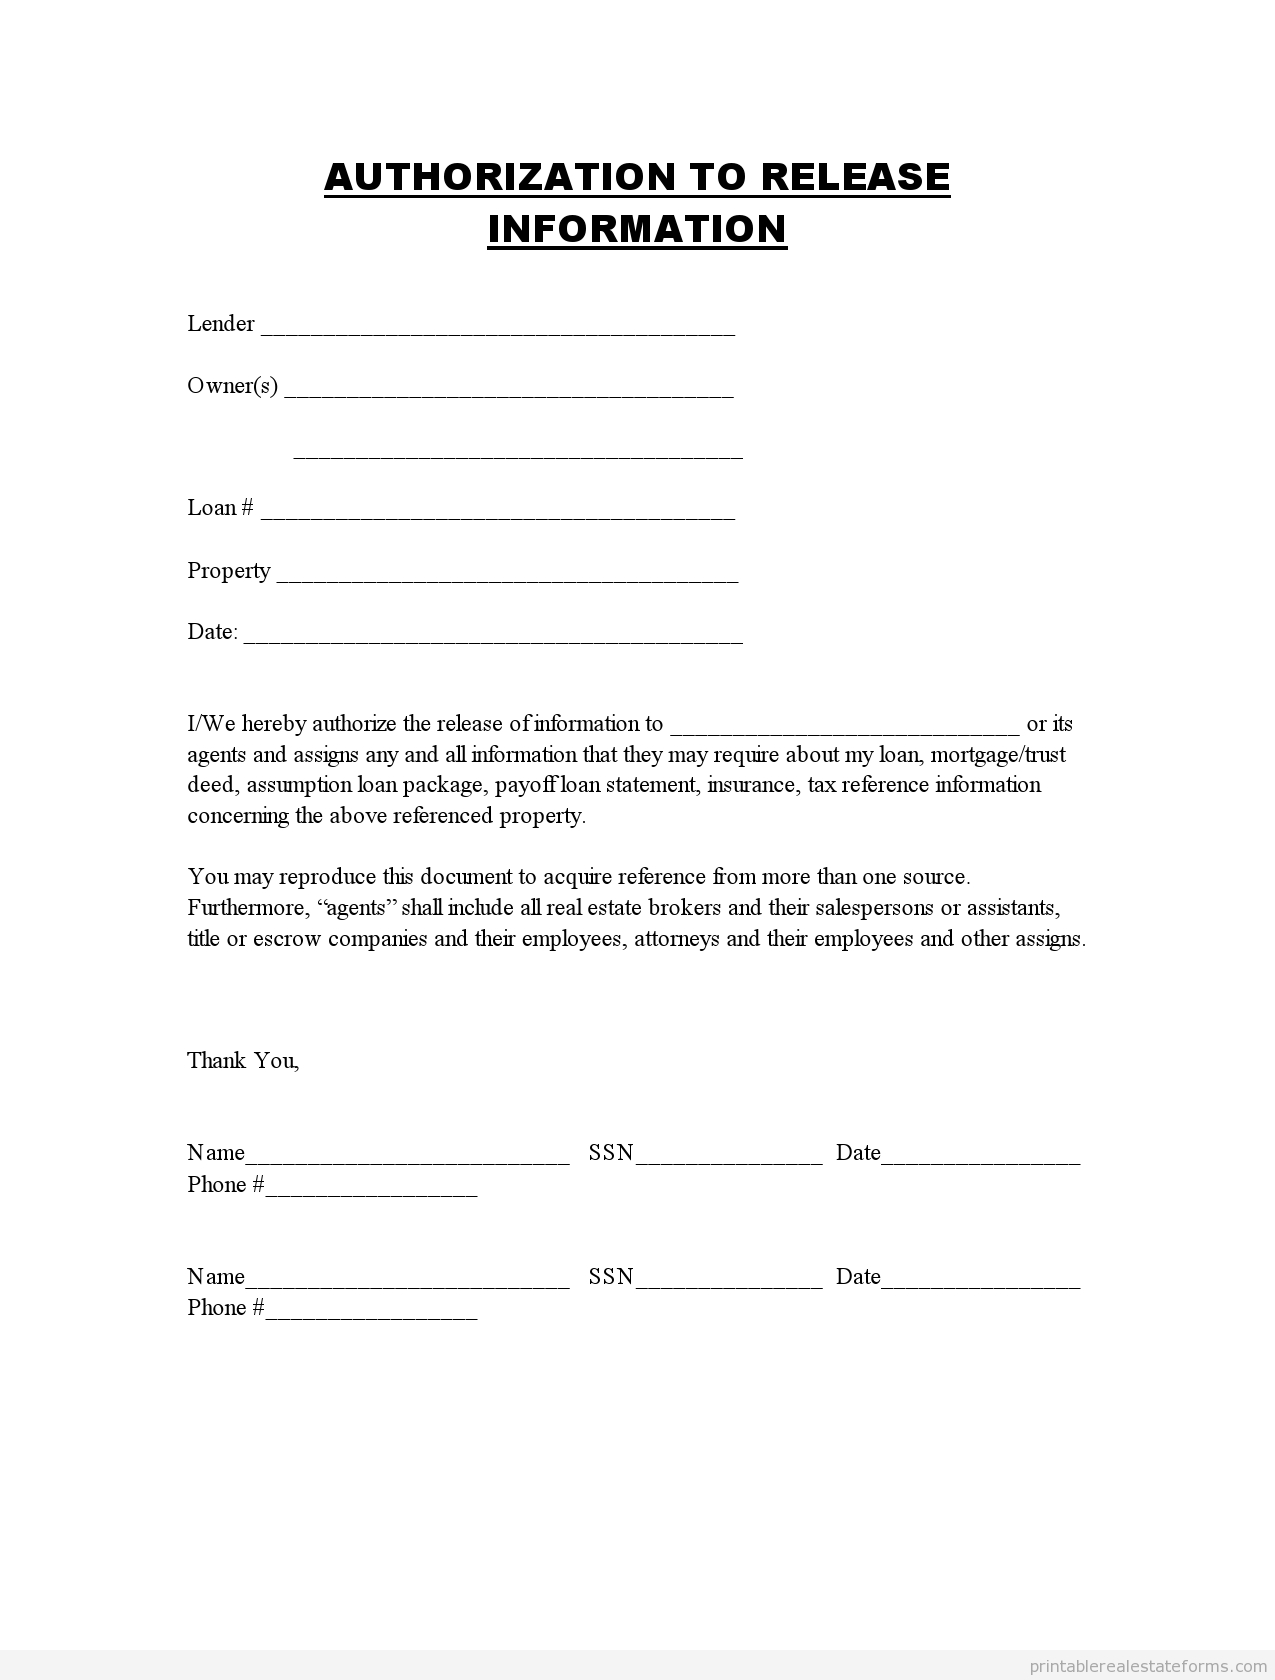 Printable Authorization To Release Information Template 2015 Within Blank Legal Document Template